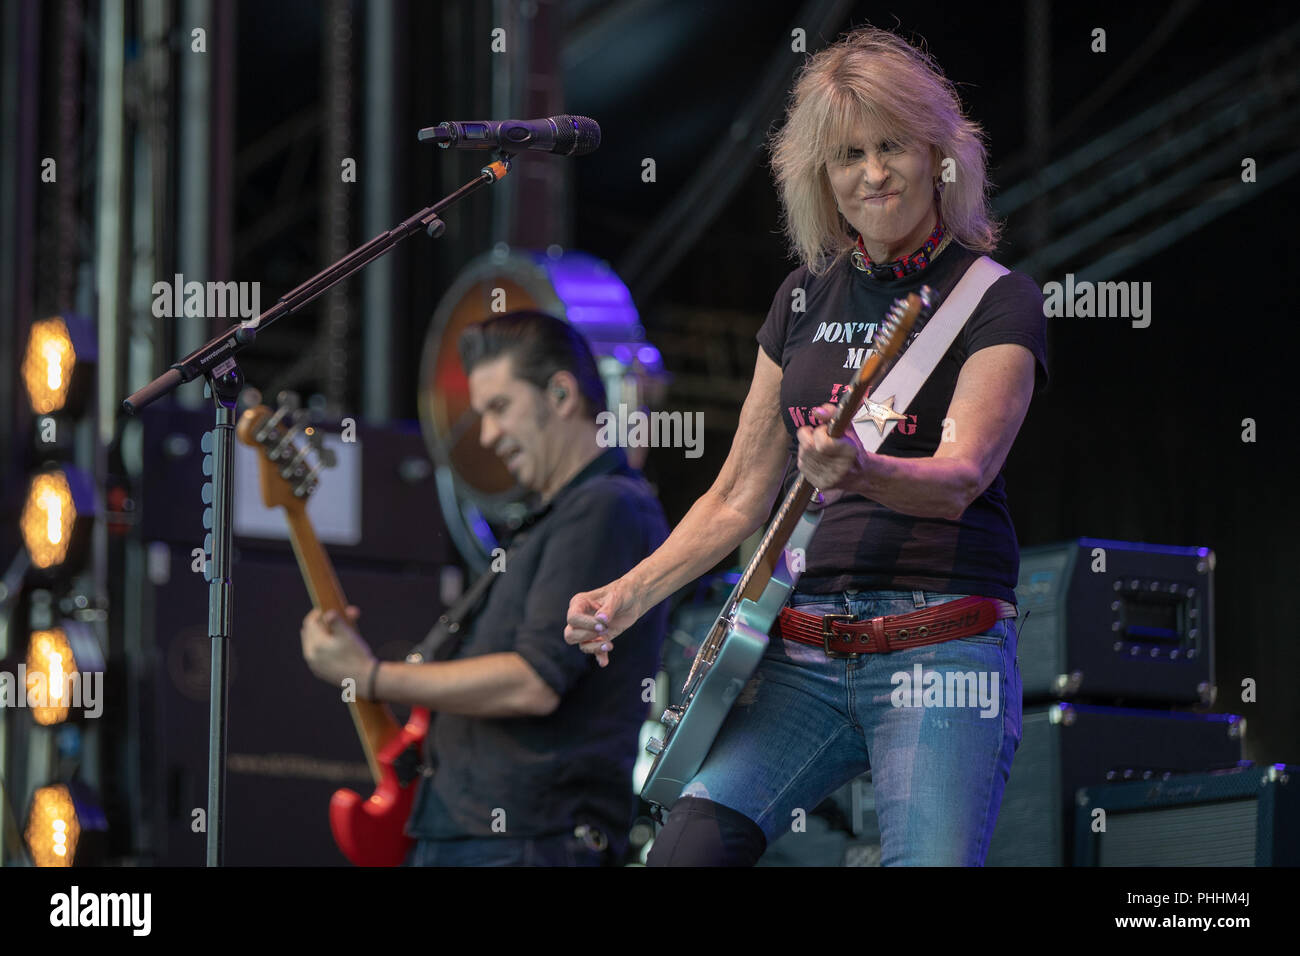 Brighton, England. 1th September 2018,The Pretenders performing at the South of England Event Centre ,Ardingly, England.© Jason Richardson / Alamy Live News Stock Photo